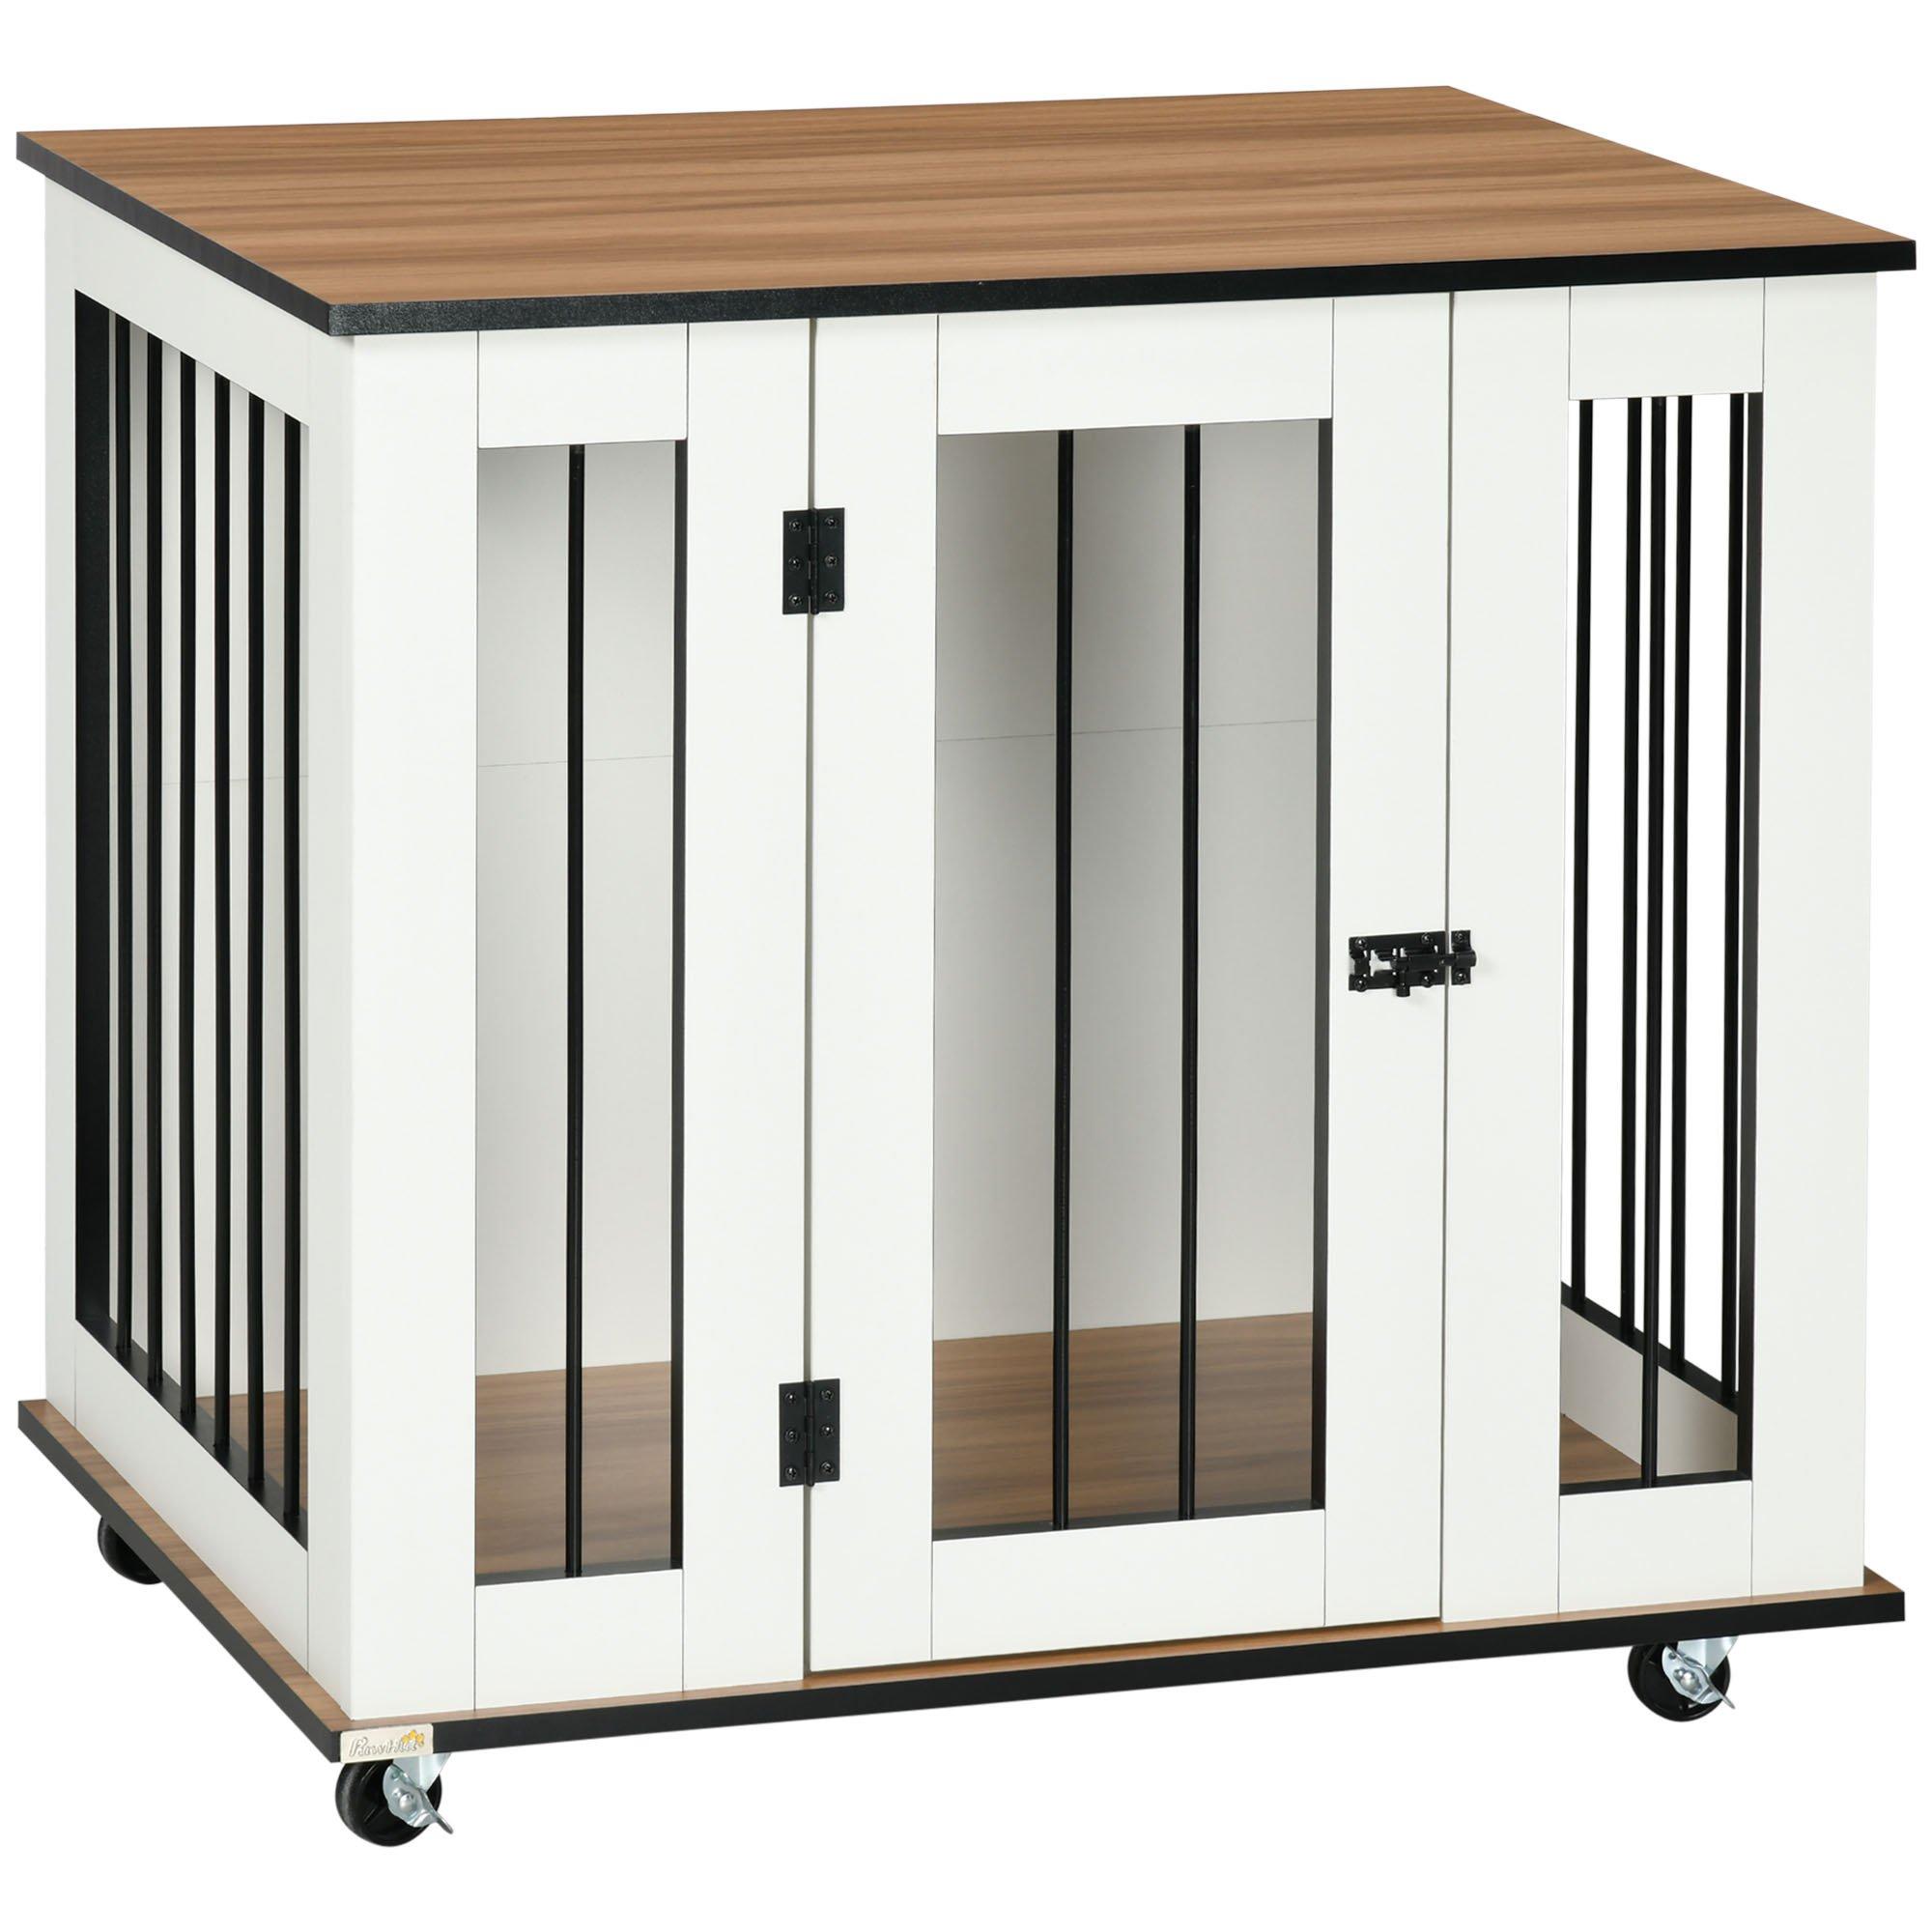 Dog Crate Furniture, Dog Cage End Table with Wheels, for Medium Dogs - White